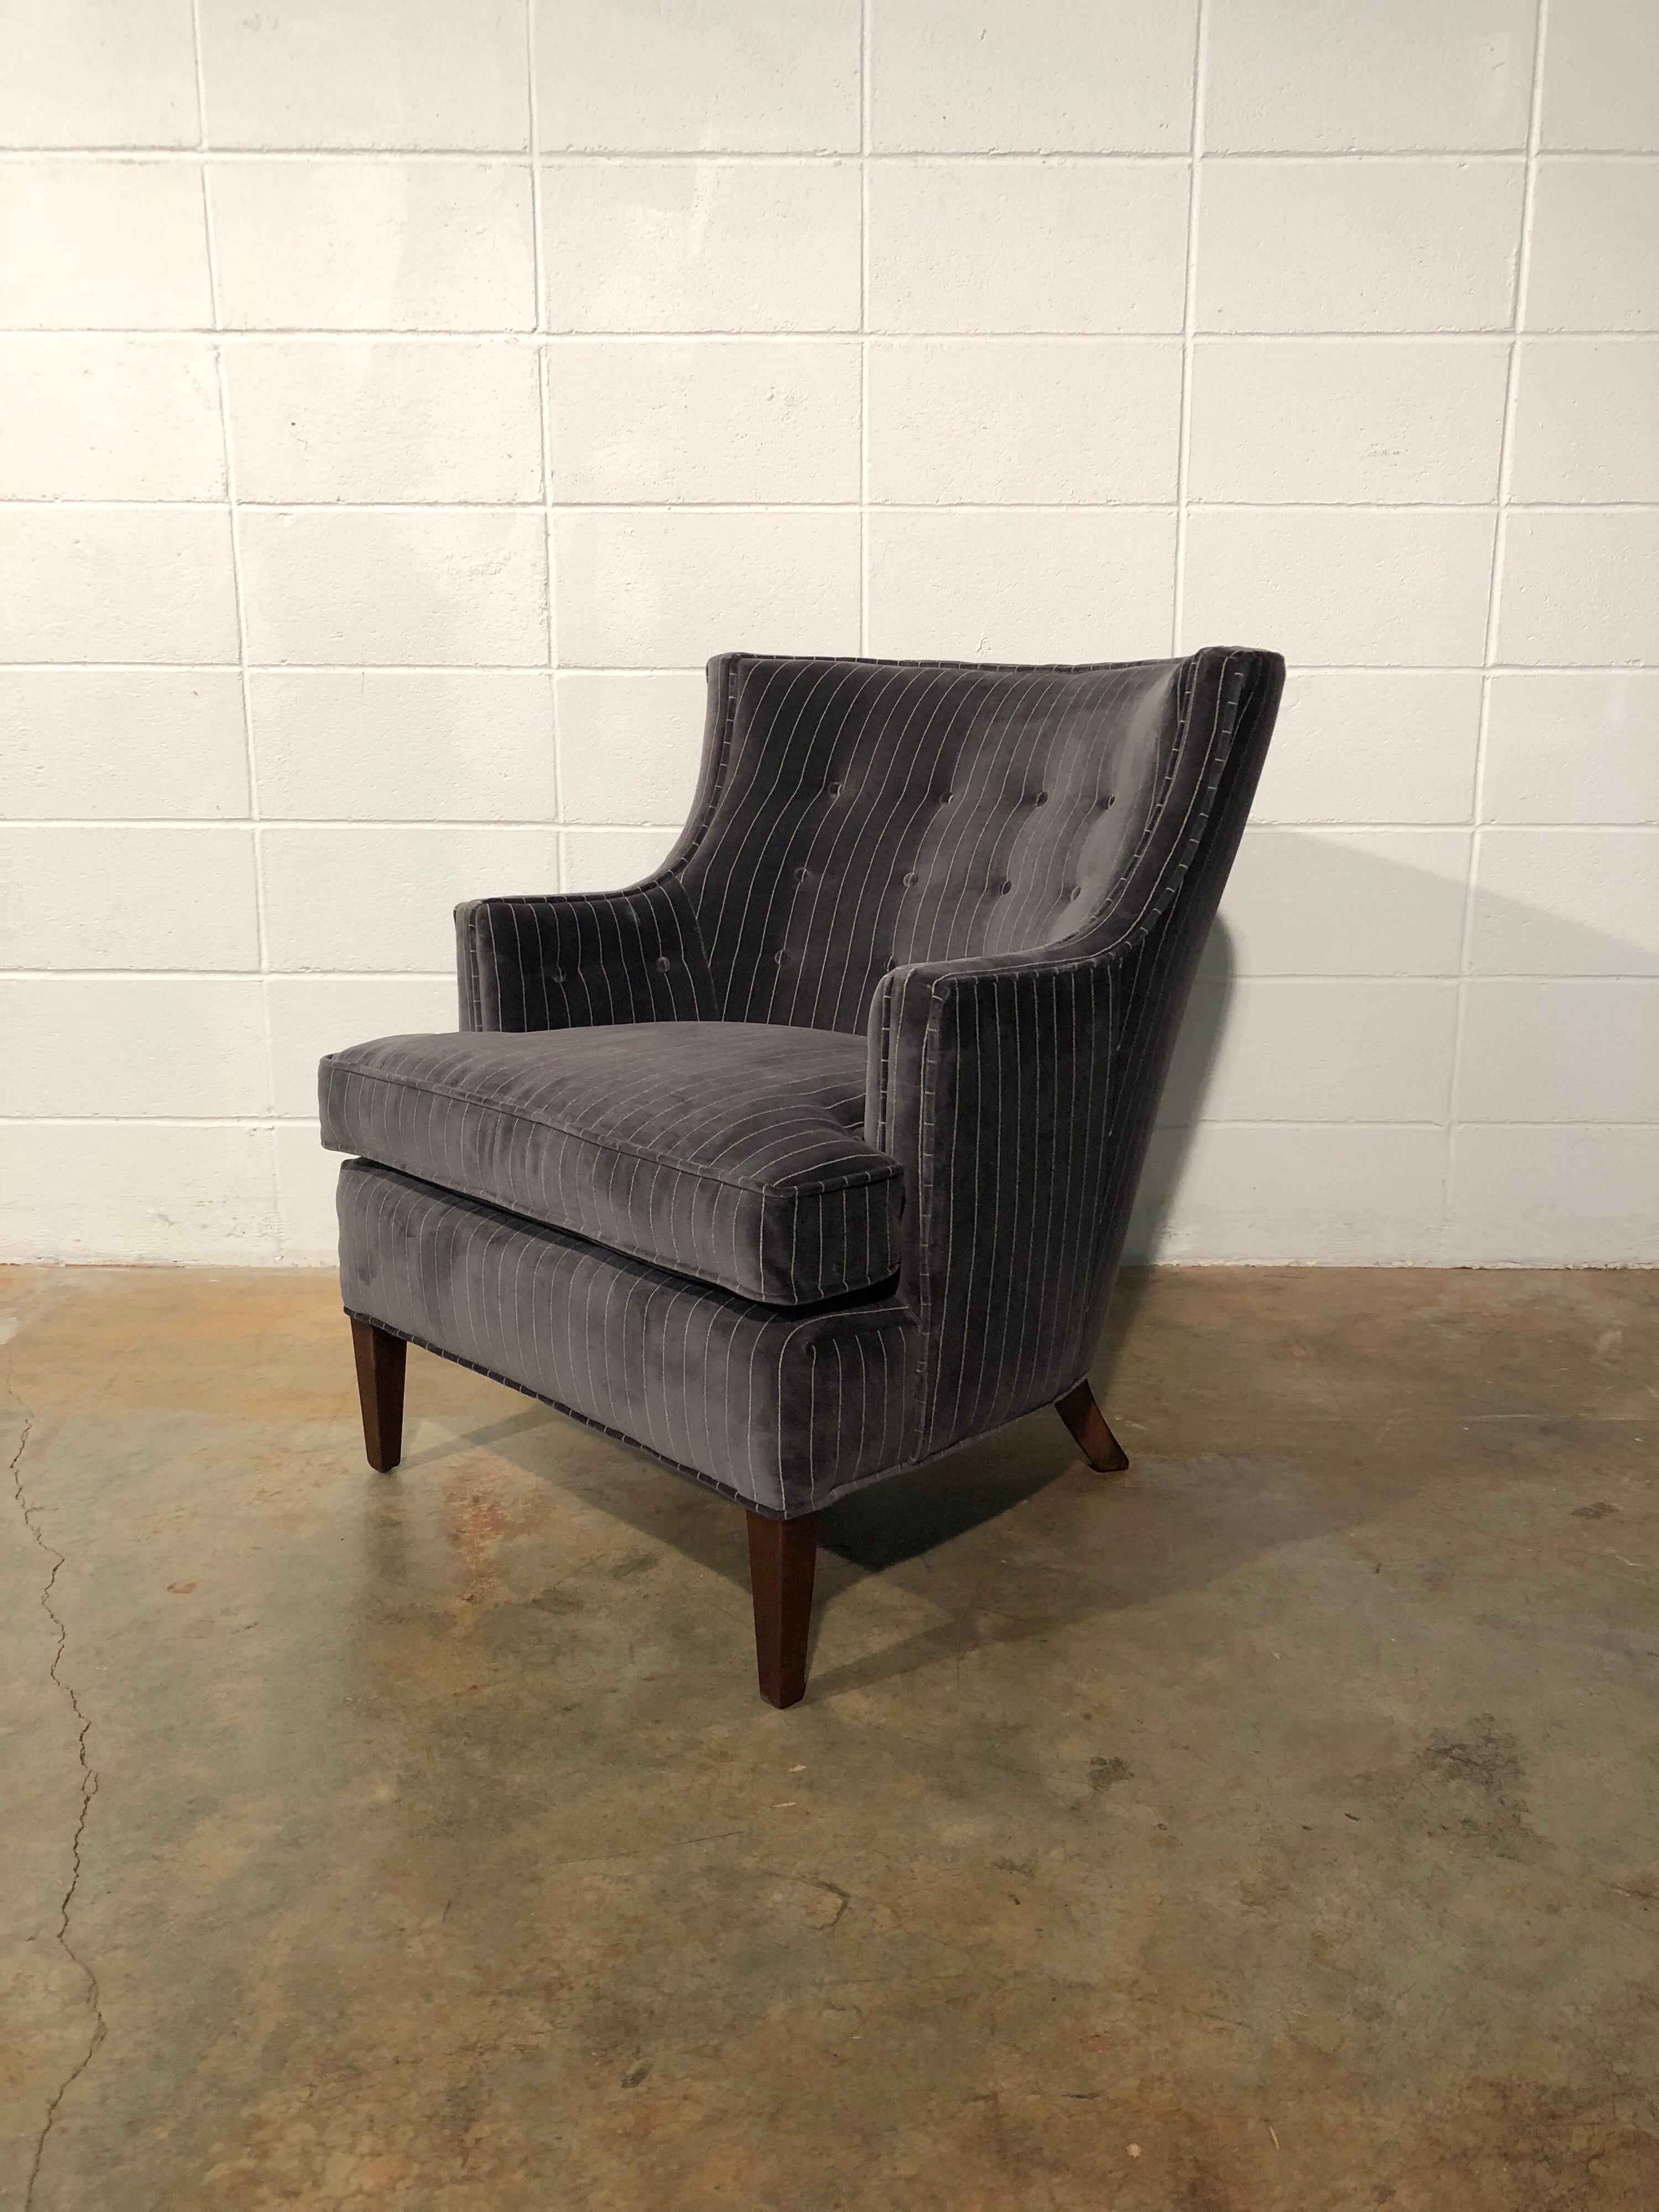 Early chair by Edward Wormley for Dunbar - fully restored
Early Dunbar slipper chair with original Dunbar construction including lasagna straps. The chair has been fully restored including new foam and wrap, new fabric, memory foam seat cushion,